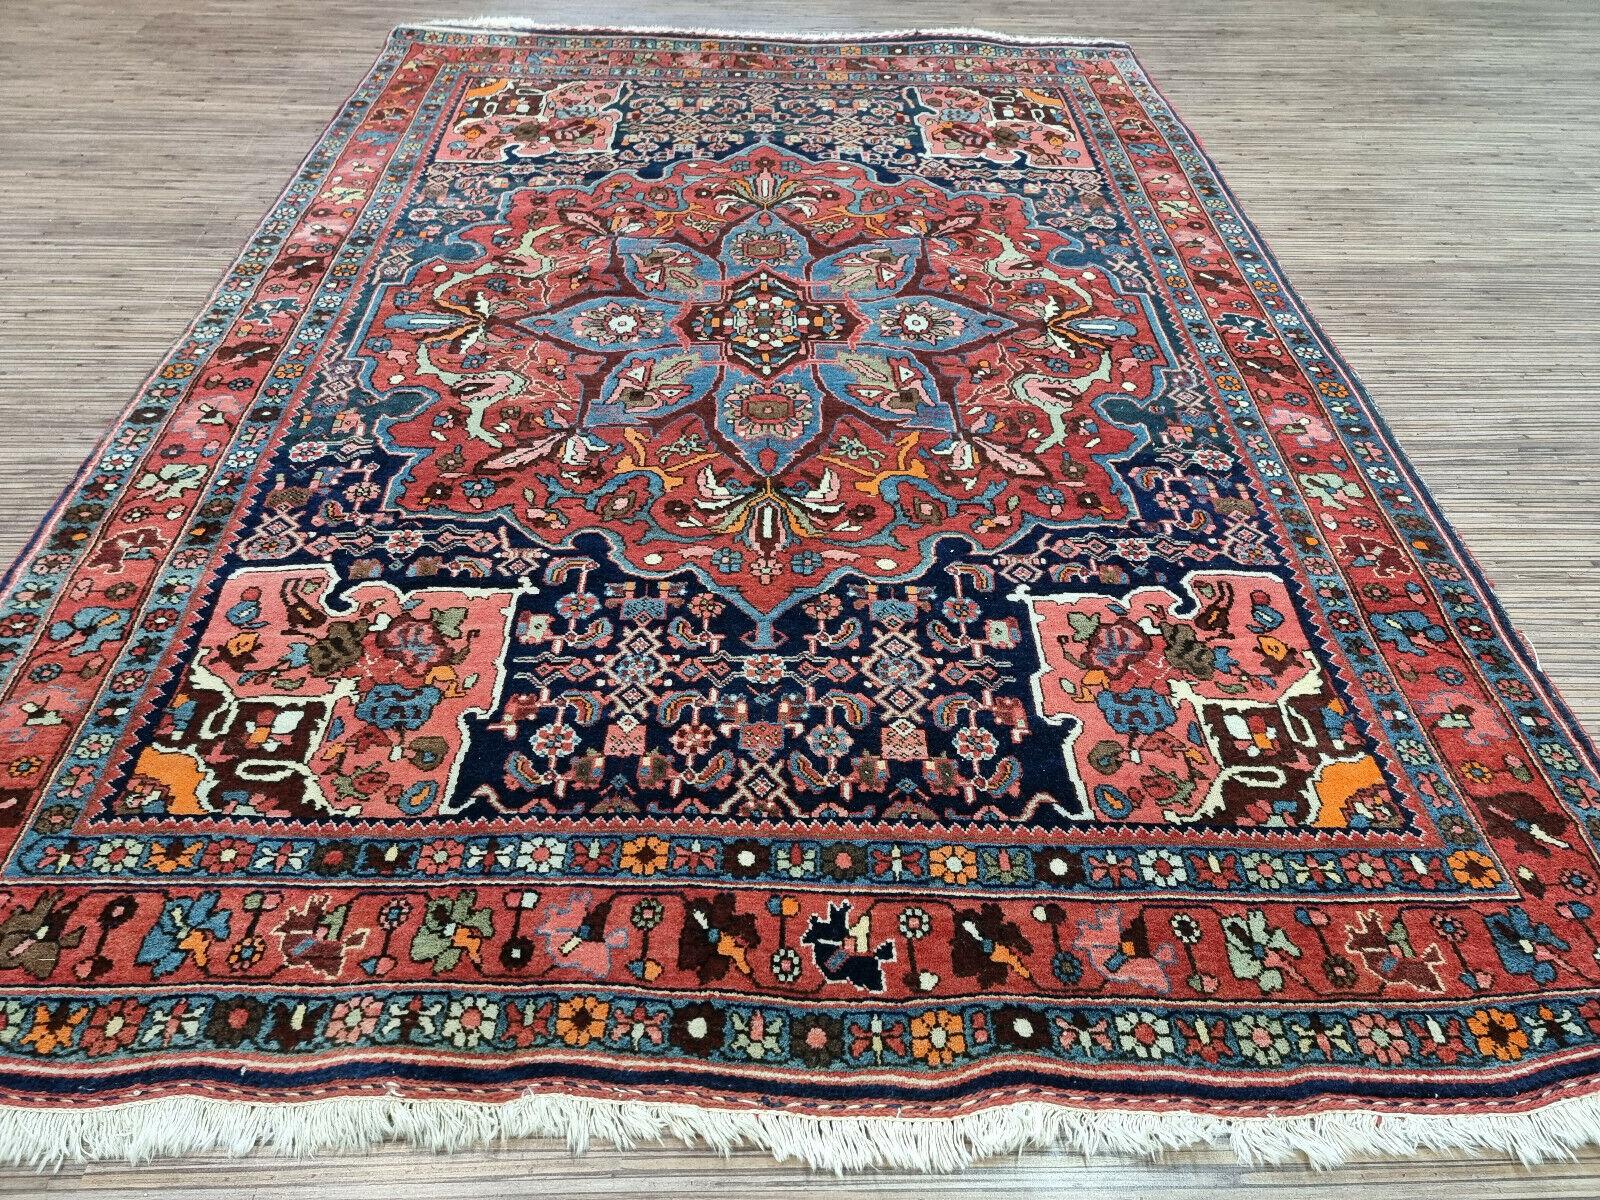 Hand-Knotted Handmade Antique Persian Style Bidjar Rug 3.8' x 5.3', 1910s - 1D100 For Sale